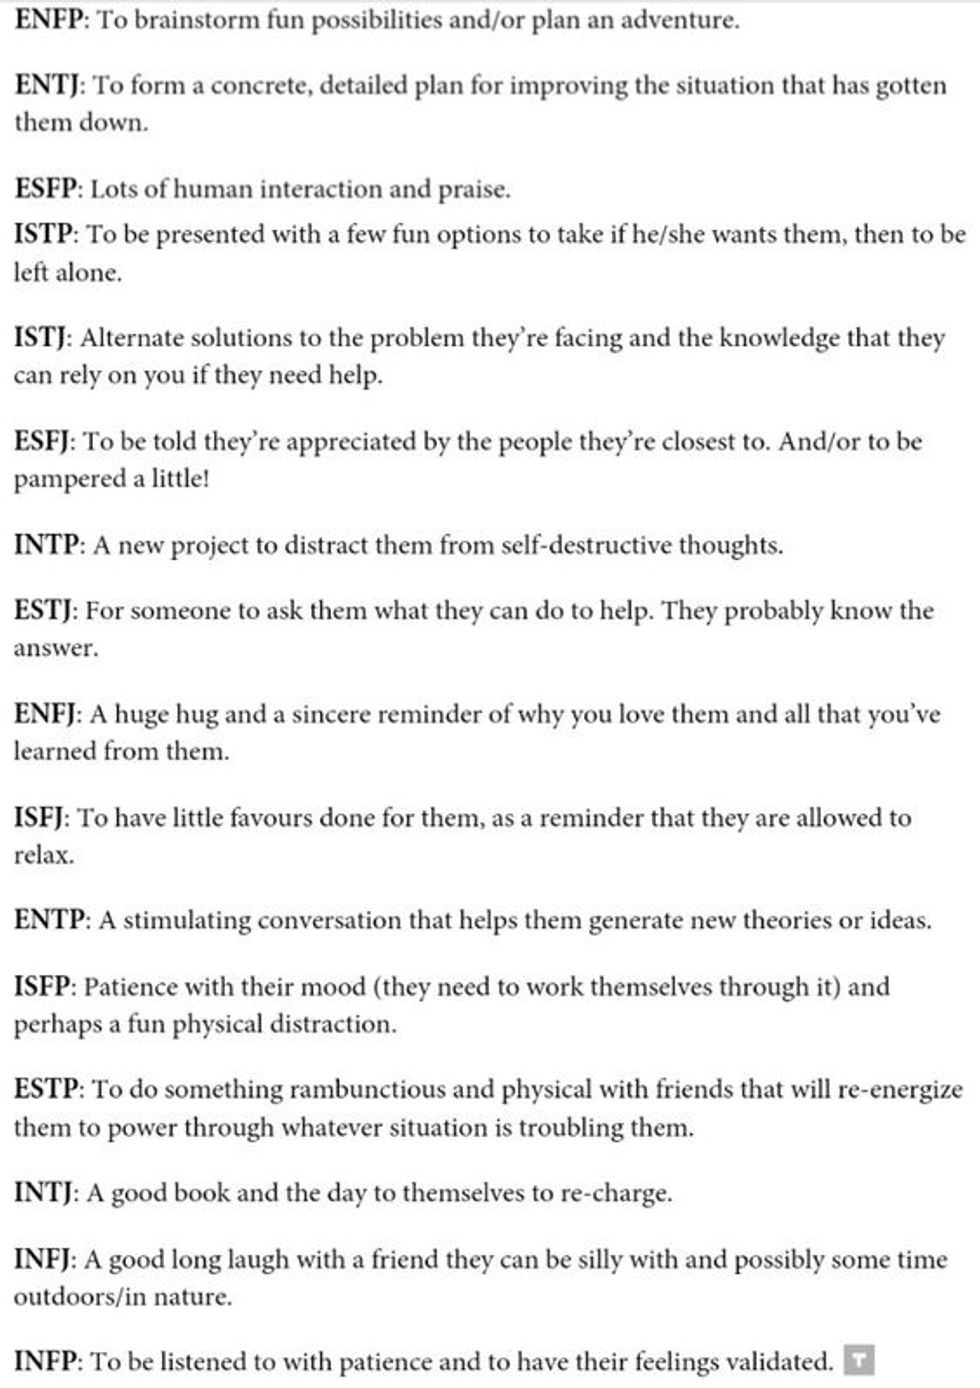 15 Accurate Descriptions Of The Myers Briggs Types